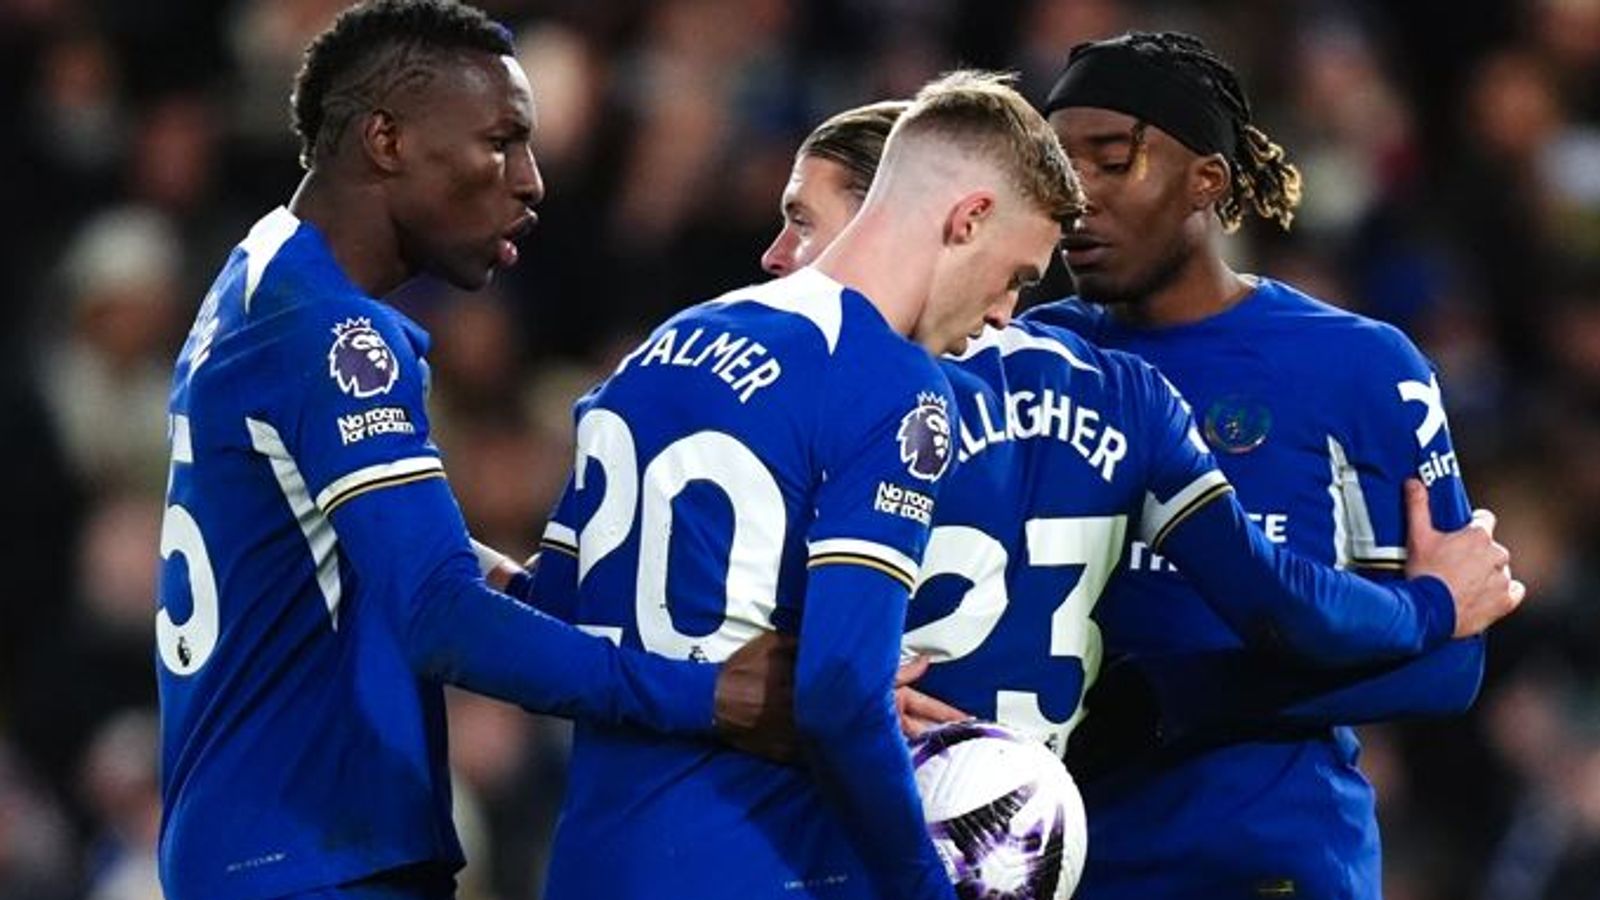 Chelsea 6-0 Everton: How Cole Palmer saw off Noni Madueke and Nicholas Jackson in Chelsea's 'daft' penalty spat